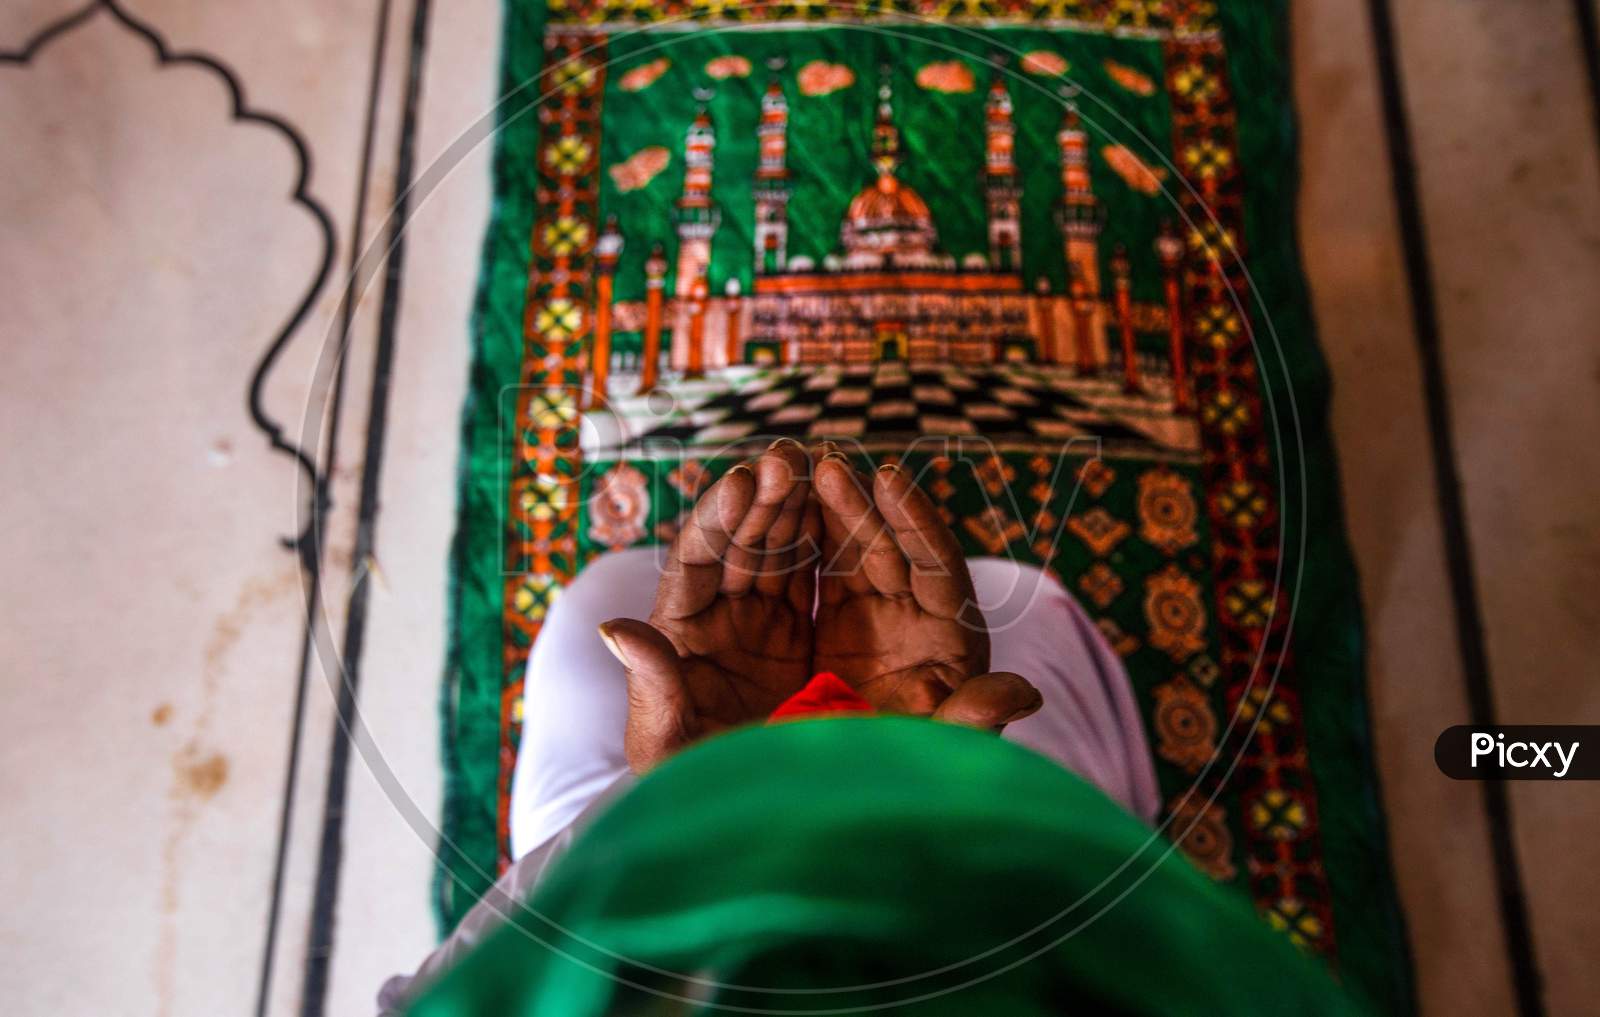 Muslims offer prayer Inside  Jama Masjid After The Opening Of Most Of The Religious Places As India Eases Lockdown Restrictions That Were Imposed To Slow The Spread Of The Coronavirus Disease (Covid-19), In The Old Quarters Of Delhi, India, June 8, 2020.